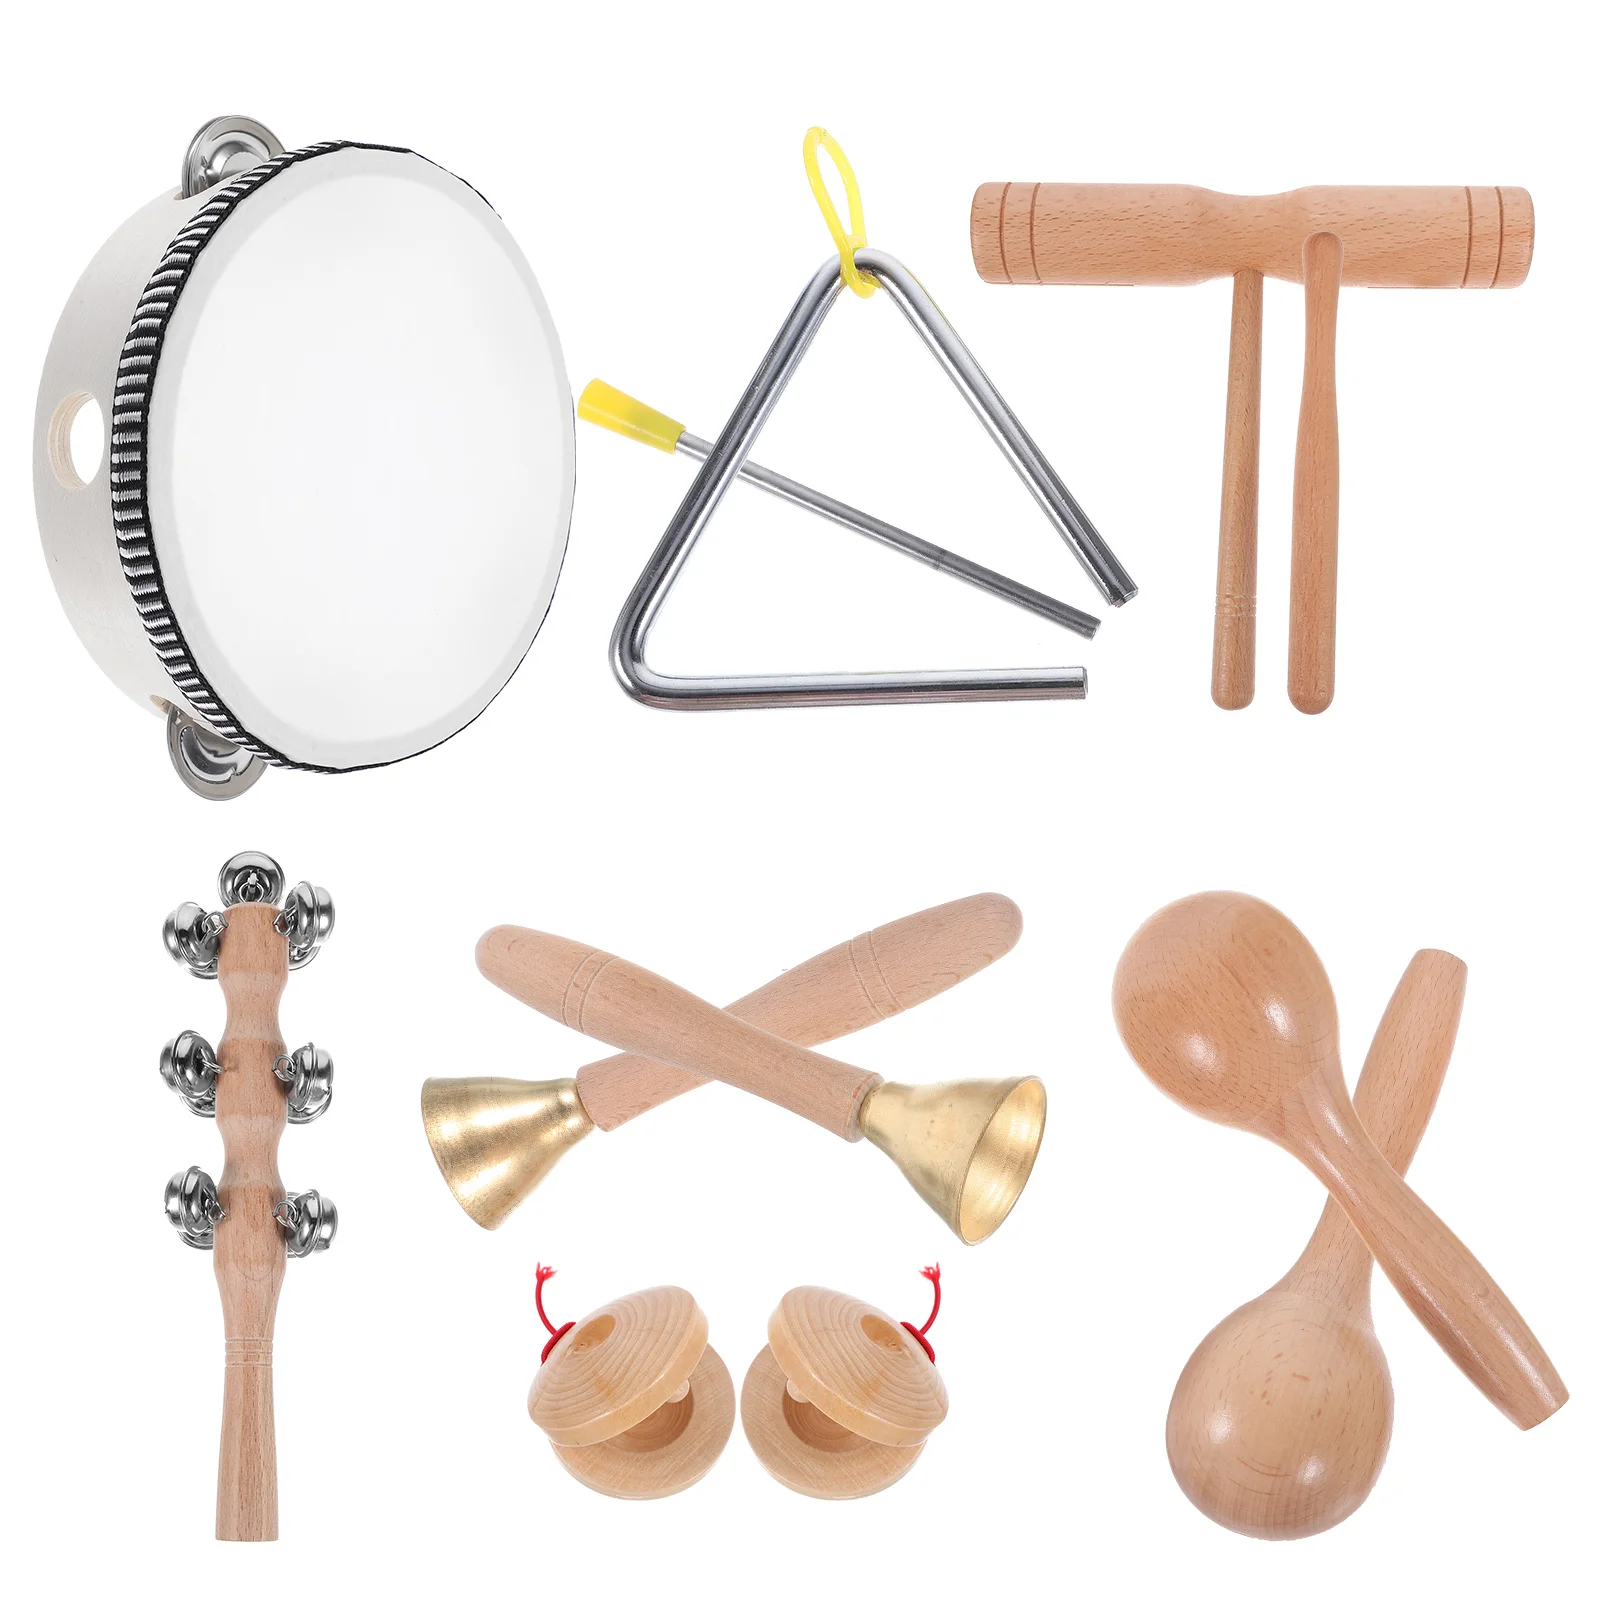 

1 Set Wooden Percussion Instrument Tambourine Drum Maraca Shaker Shaking Bell Triangle Bell Rhythm Block Castanets Wooden